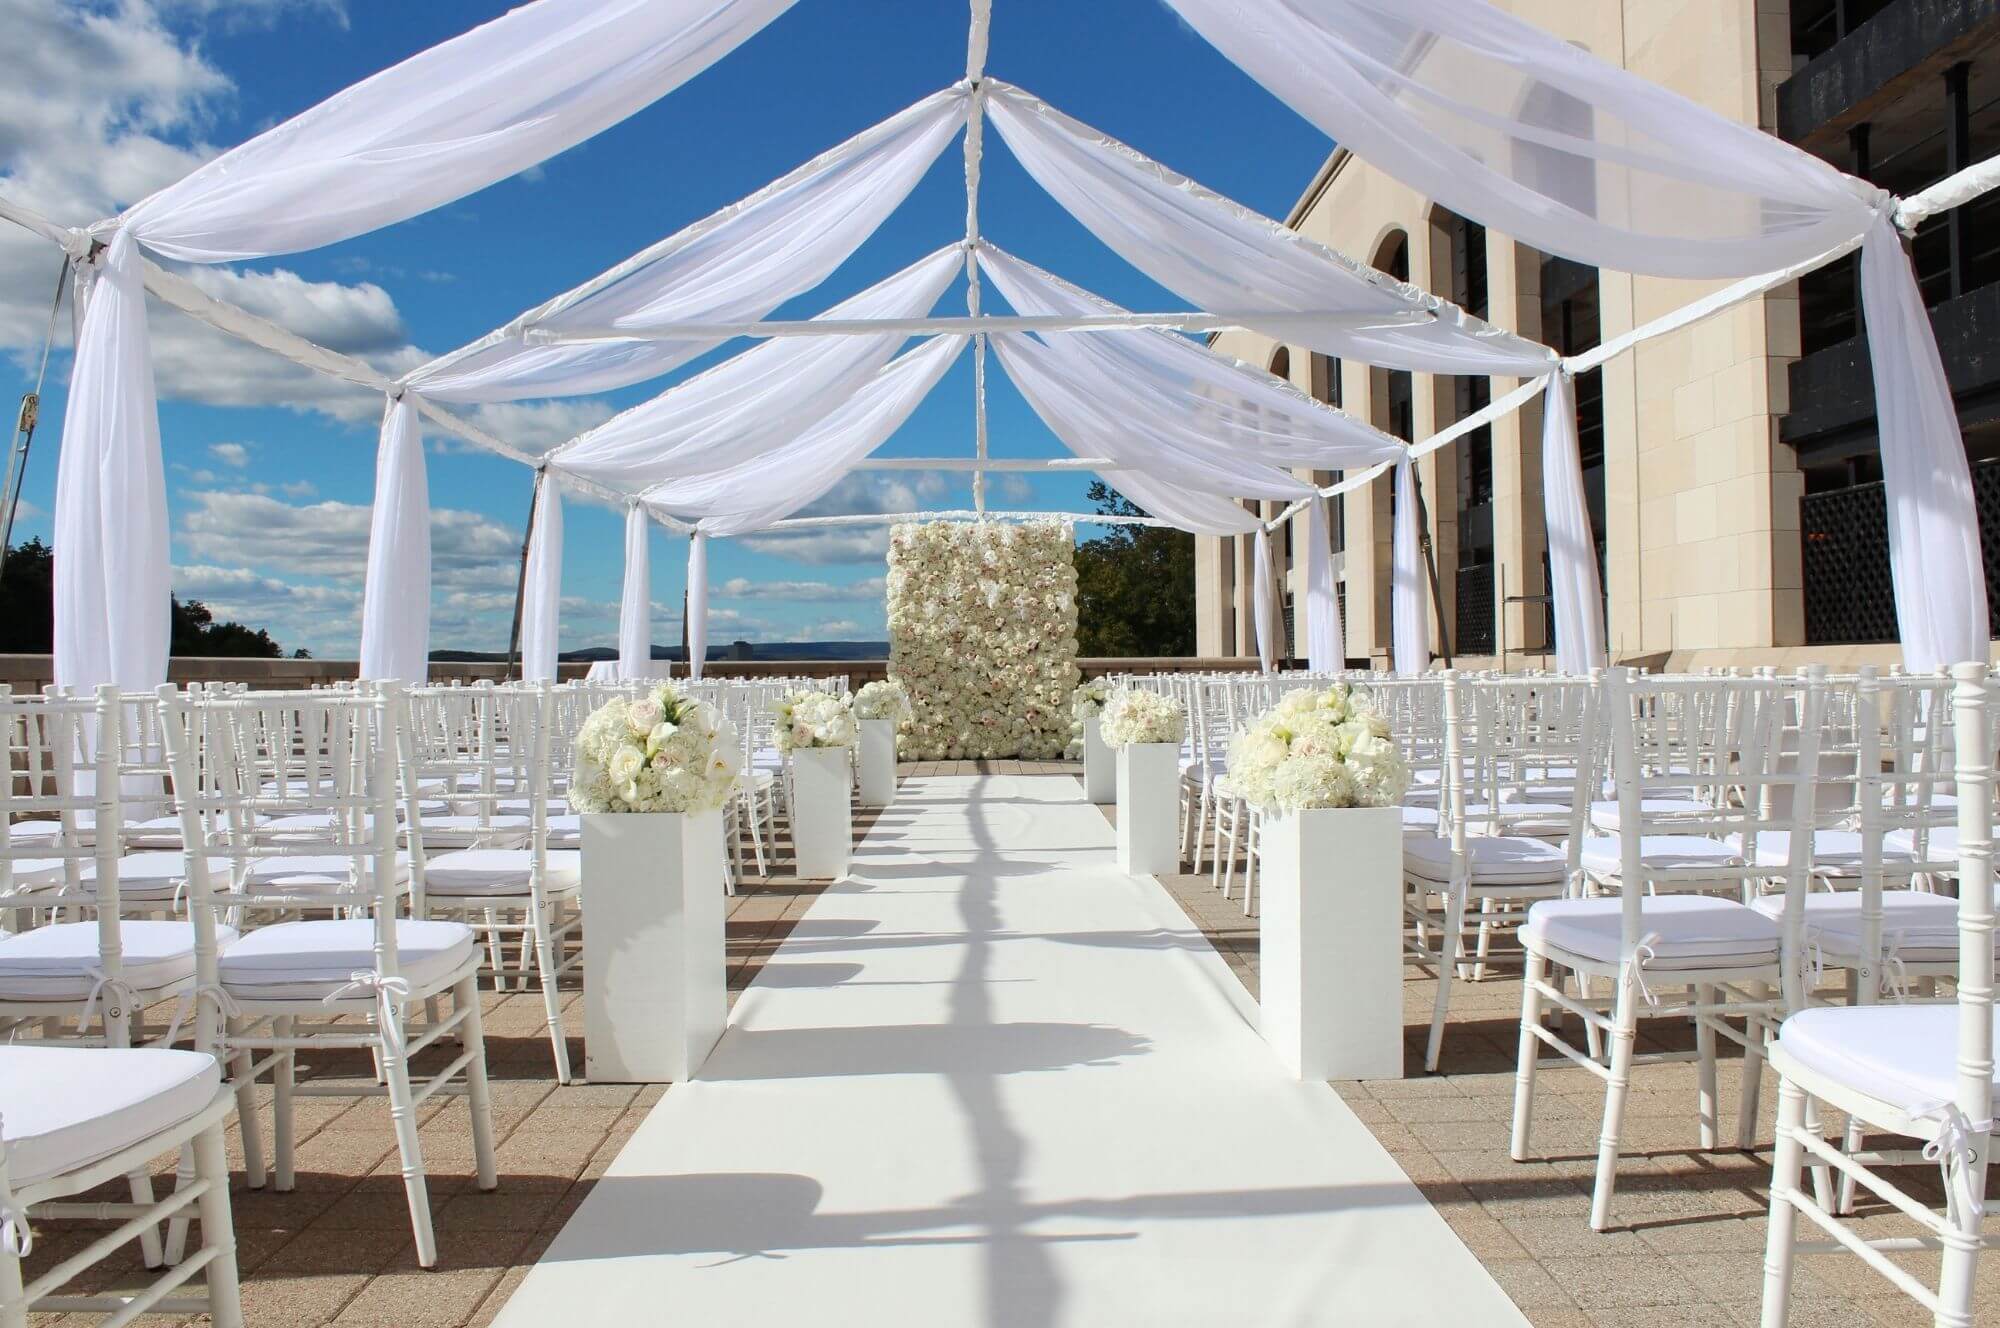 Chateau Laurier Terrasse Wedding Ceremony